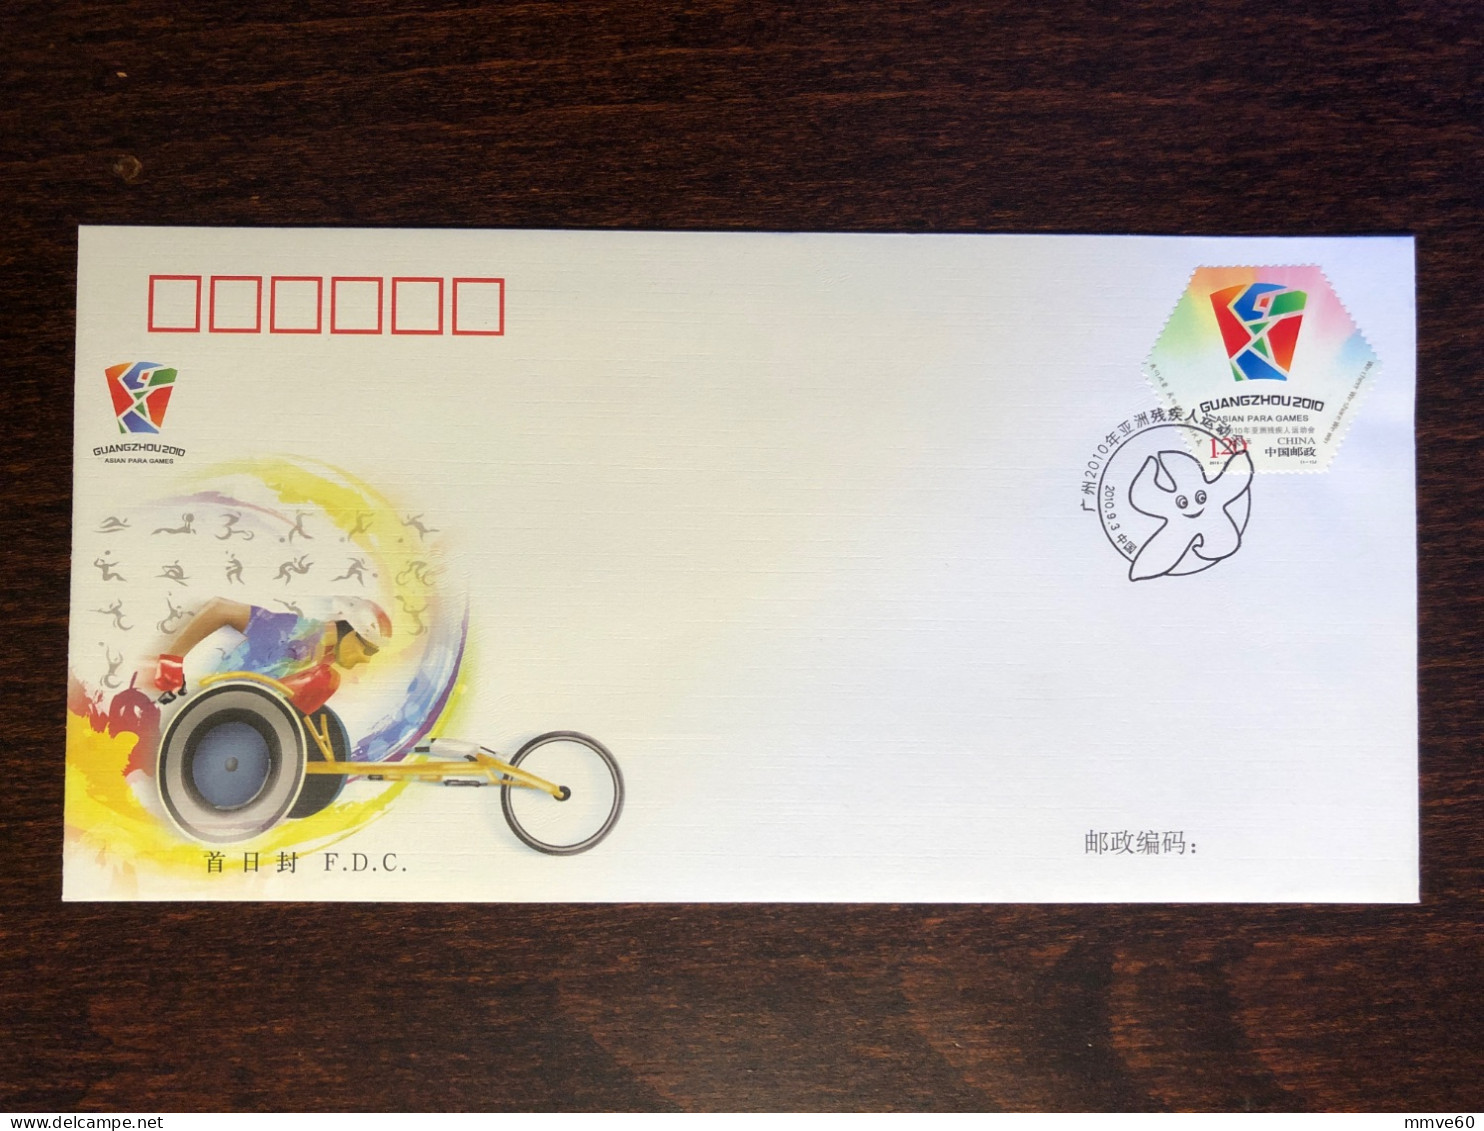 CHINA PRC FDC COVER 2010 YEAR ASIAN PARALYMPIC GAMES SPORTS HEALTH MEDICINE STAMPS - 1990-1999